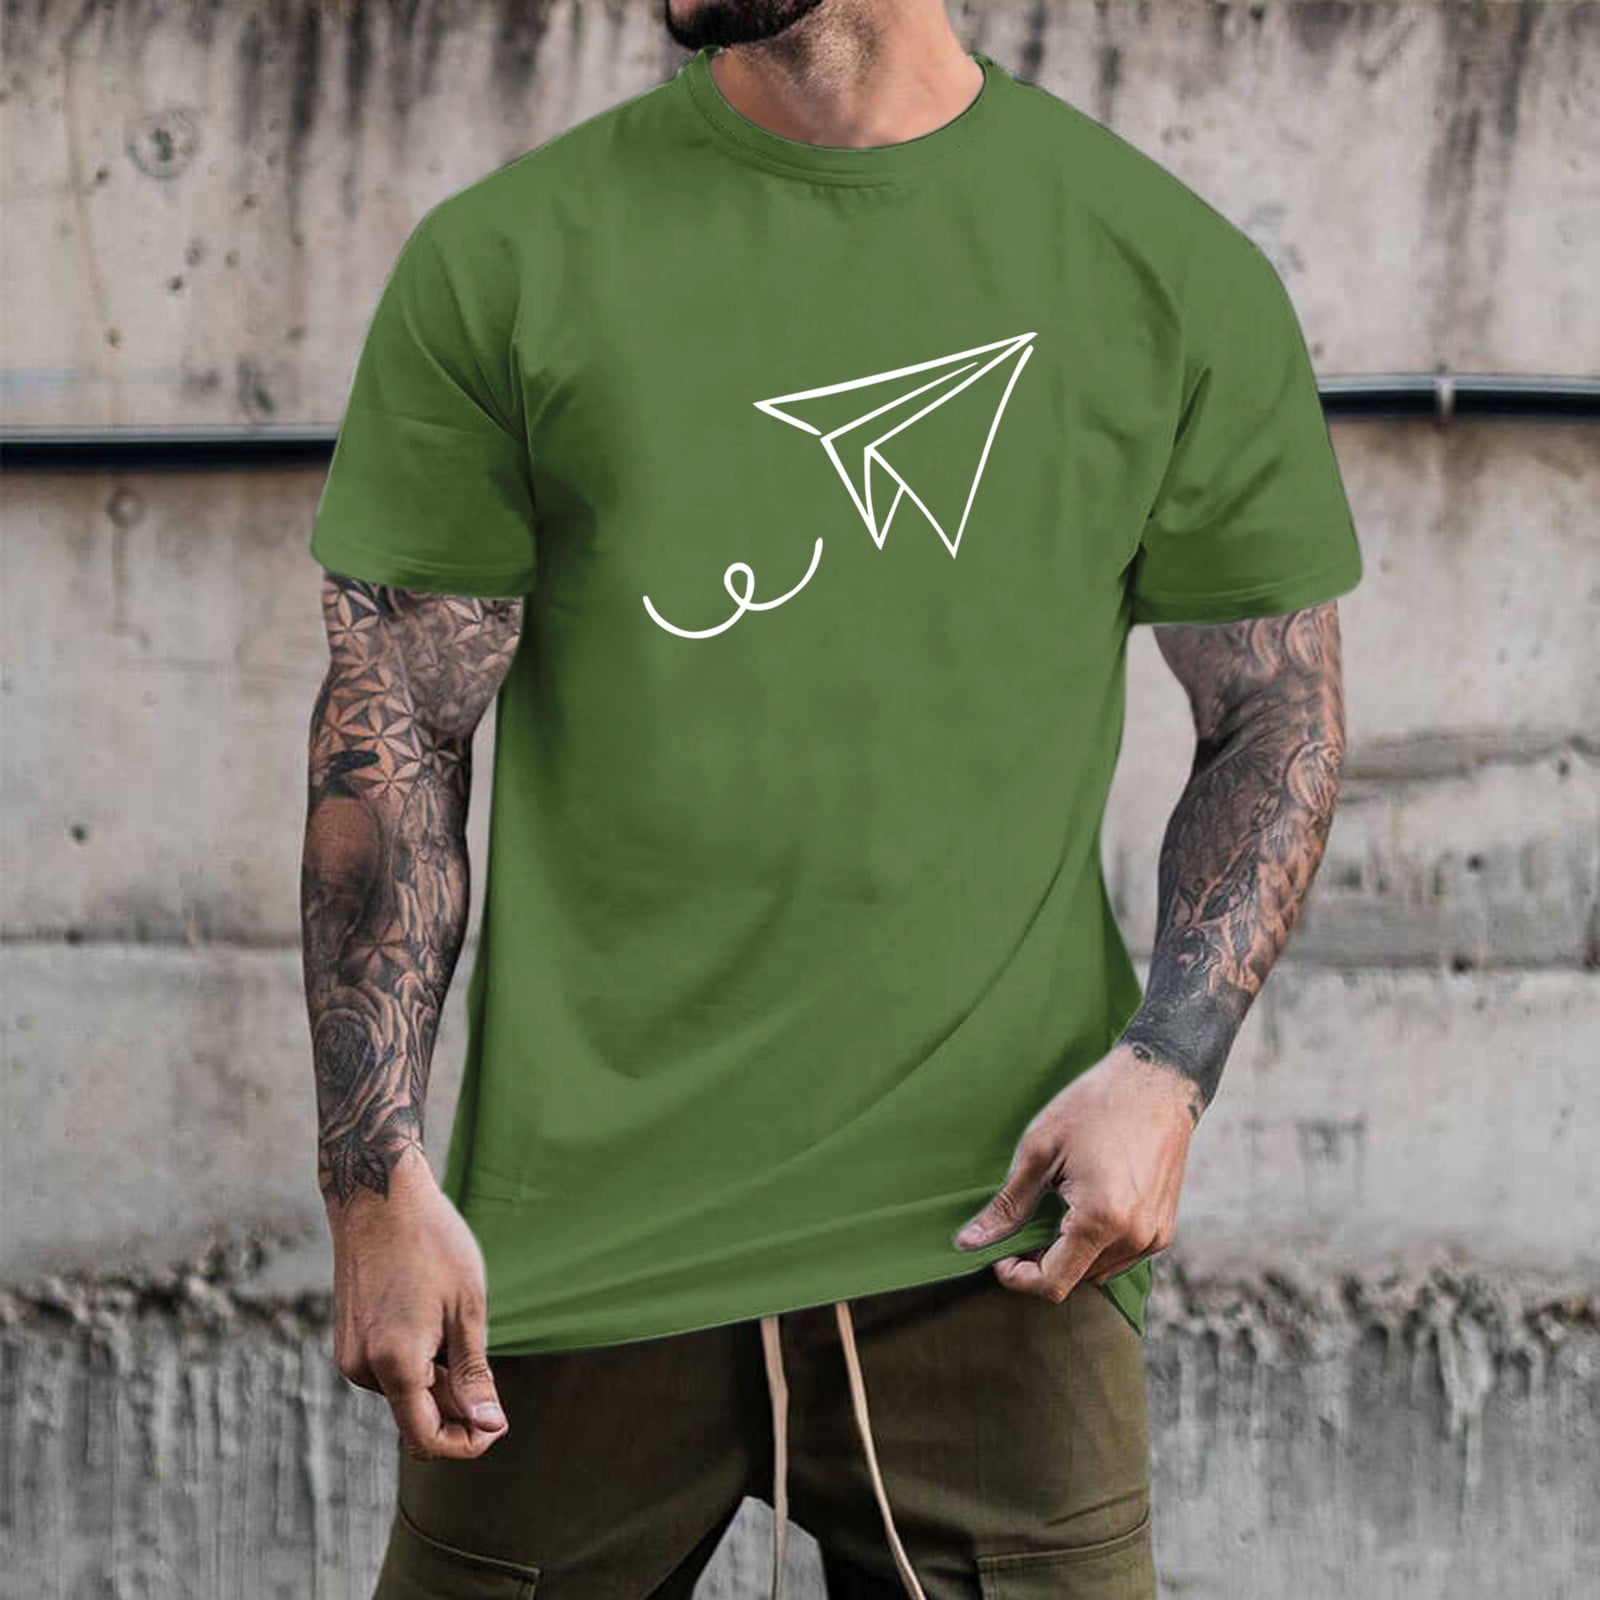 Mens Shirts Male Summer Casual Paper Plane Print T Shirt Blouse Short  Sleeve Round Neck Tops T Shirt flannel shirt for men